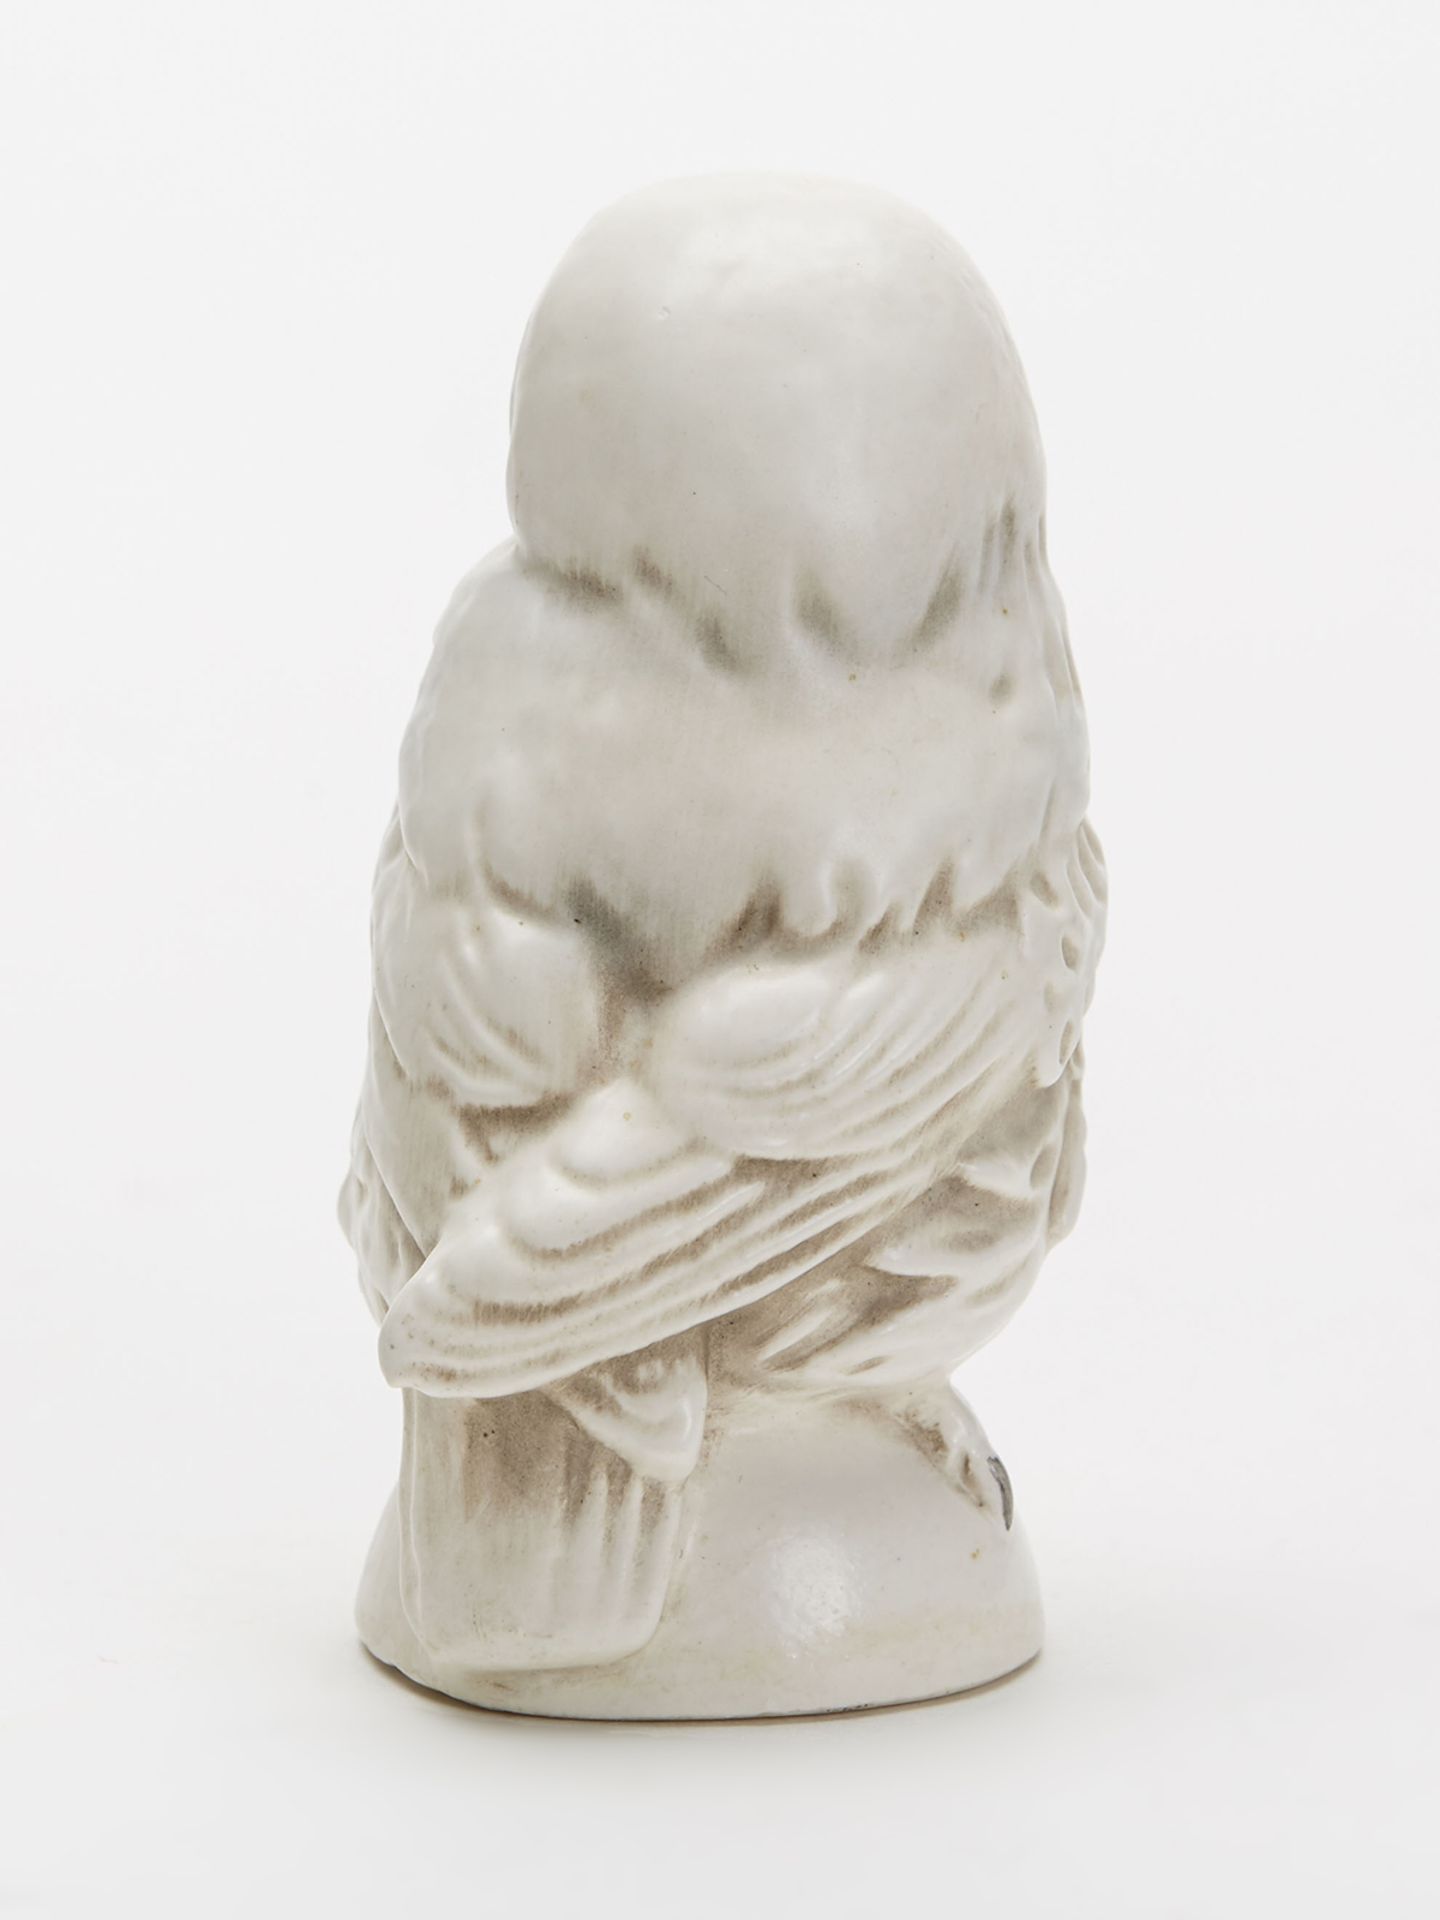 Vintage W Goebel Pottery Figure Of A Snowy Owl 20Th C. - Image 4 of 7